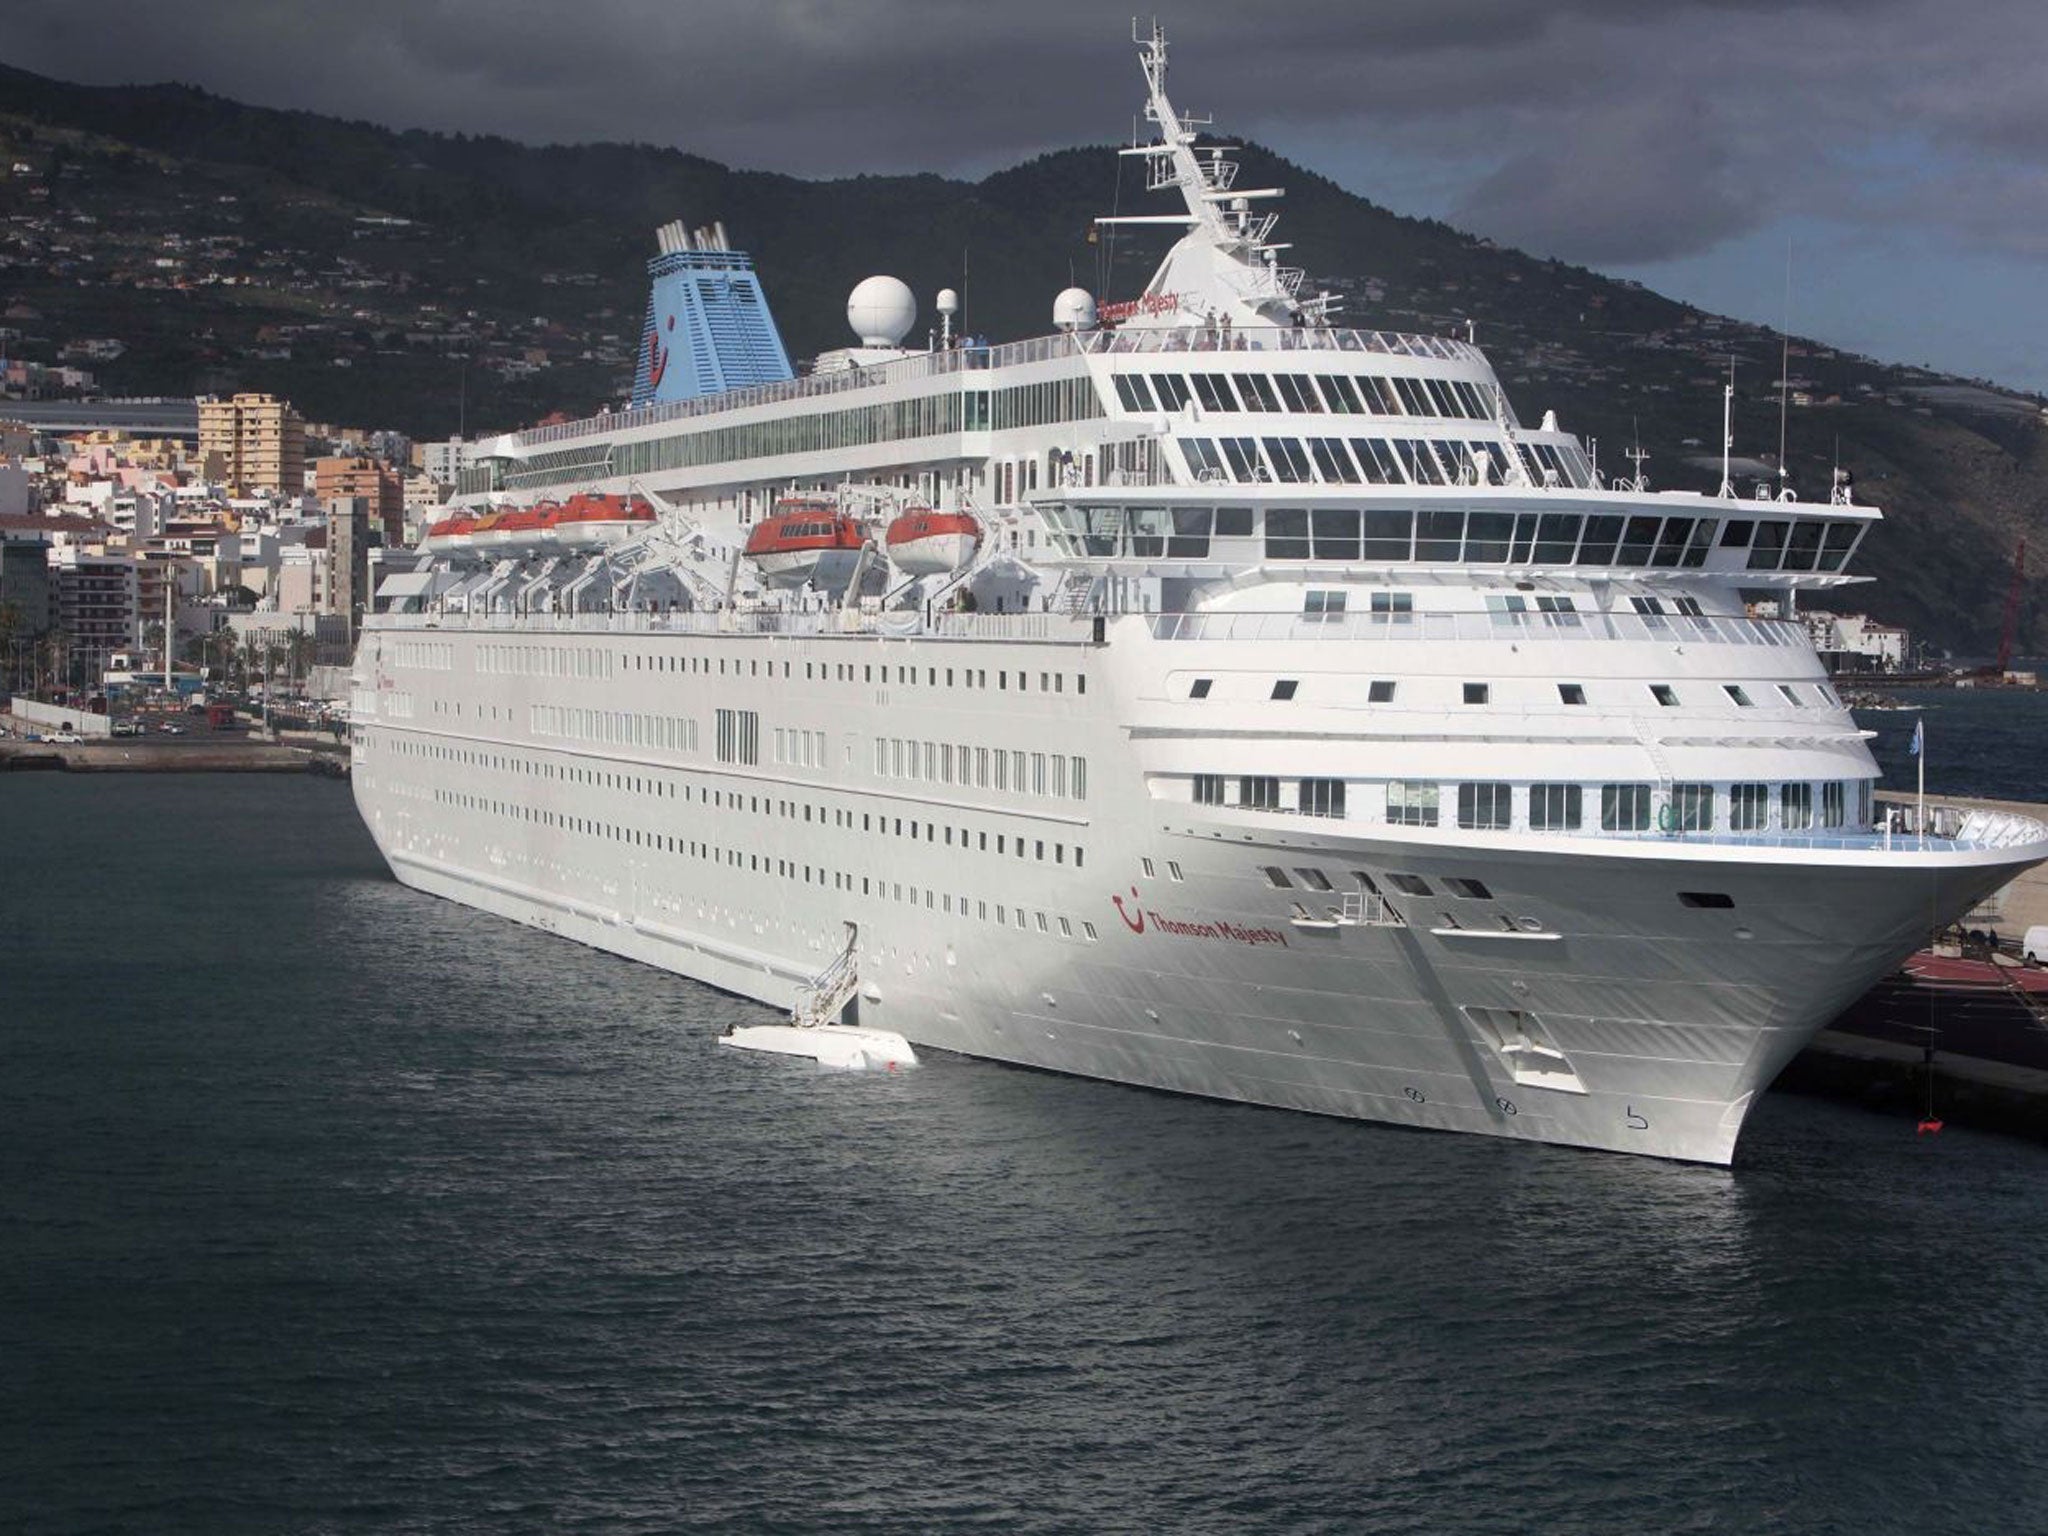 A lifeboat remains in the sea after falling from the cruise liner and killing 5 people during a safety drill